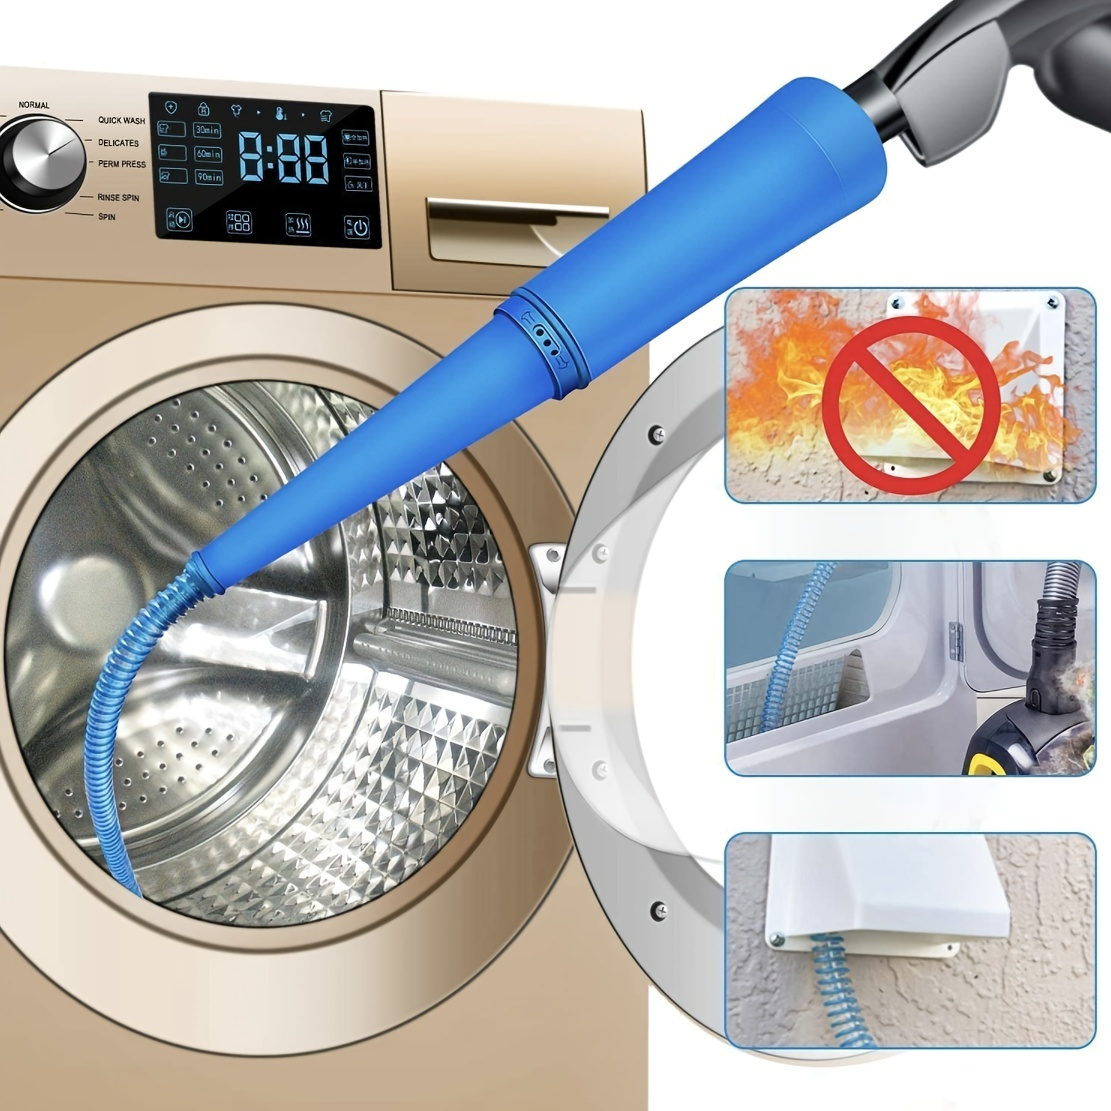 

Deep Clean Your Dryer Vents And Reduce Fire Risk With This 1pc Dryer Vent Cleaner Accessory!